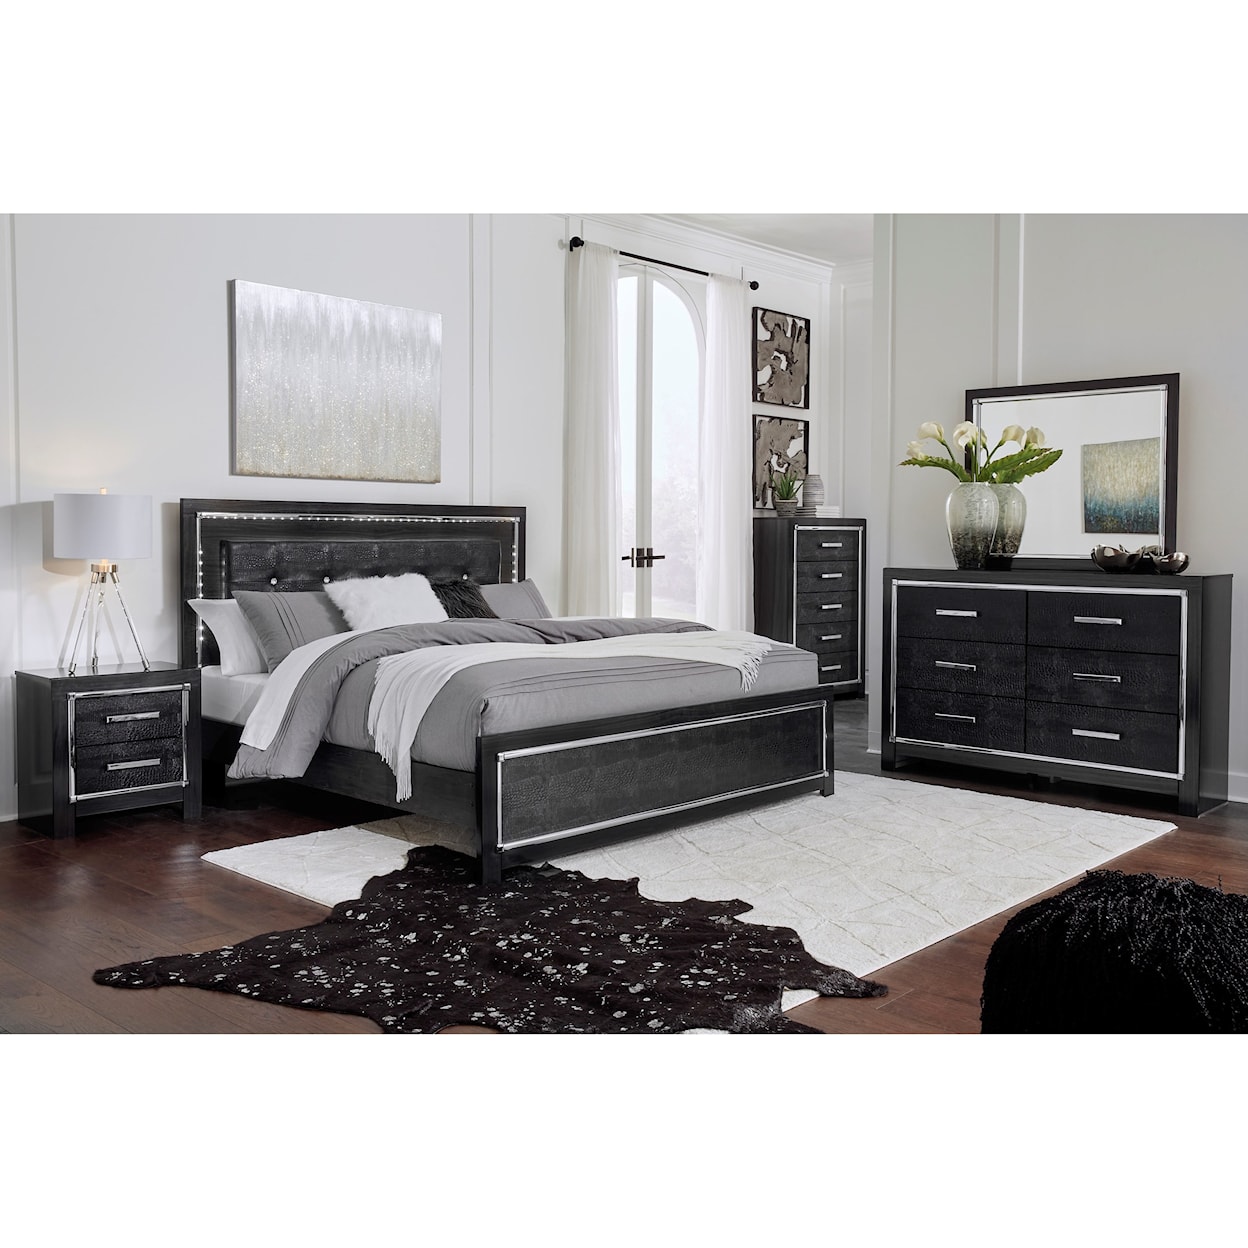 Signature Design by Ashley Kaydell King Bedroom Group